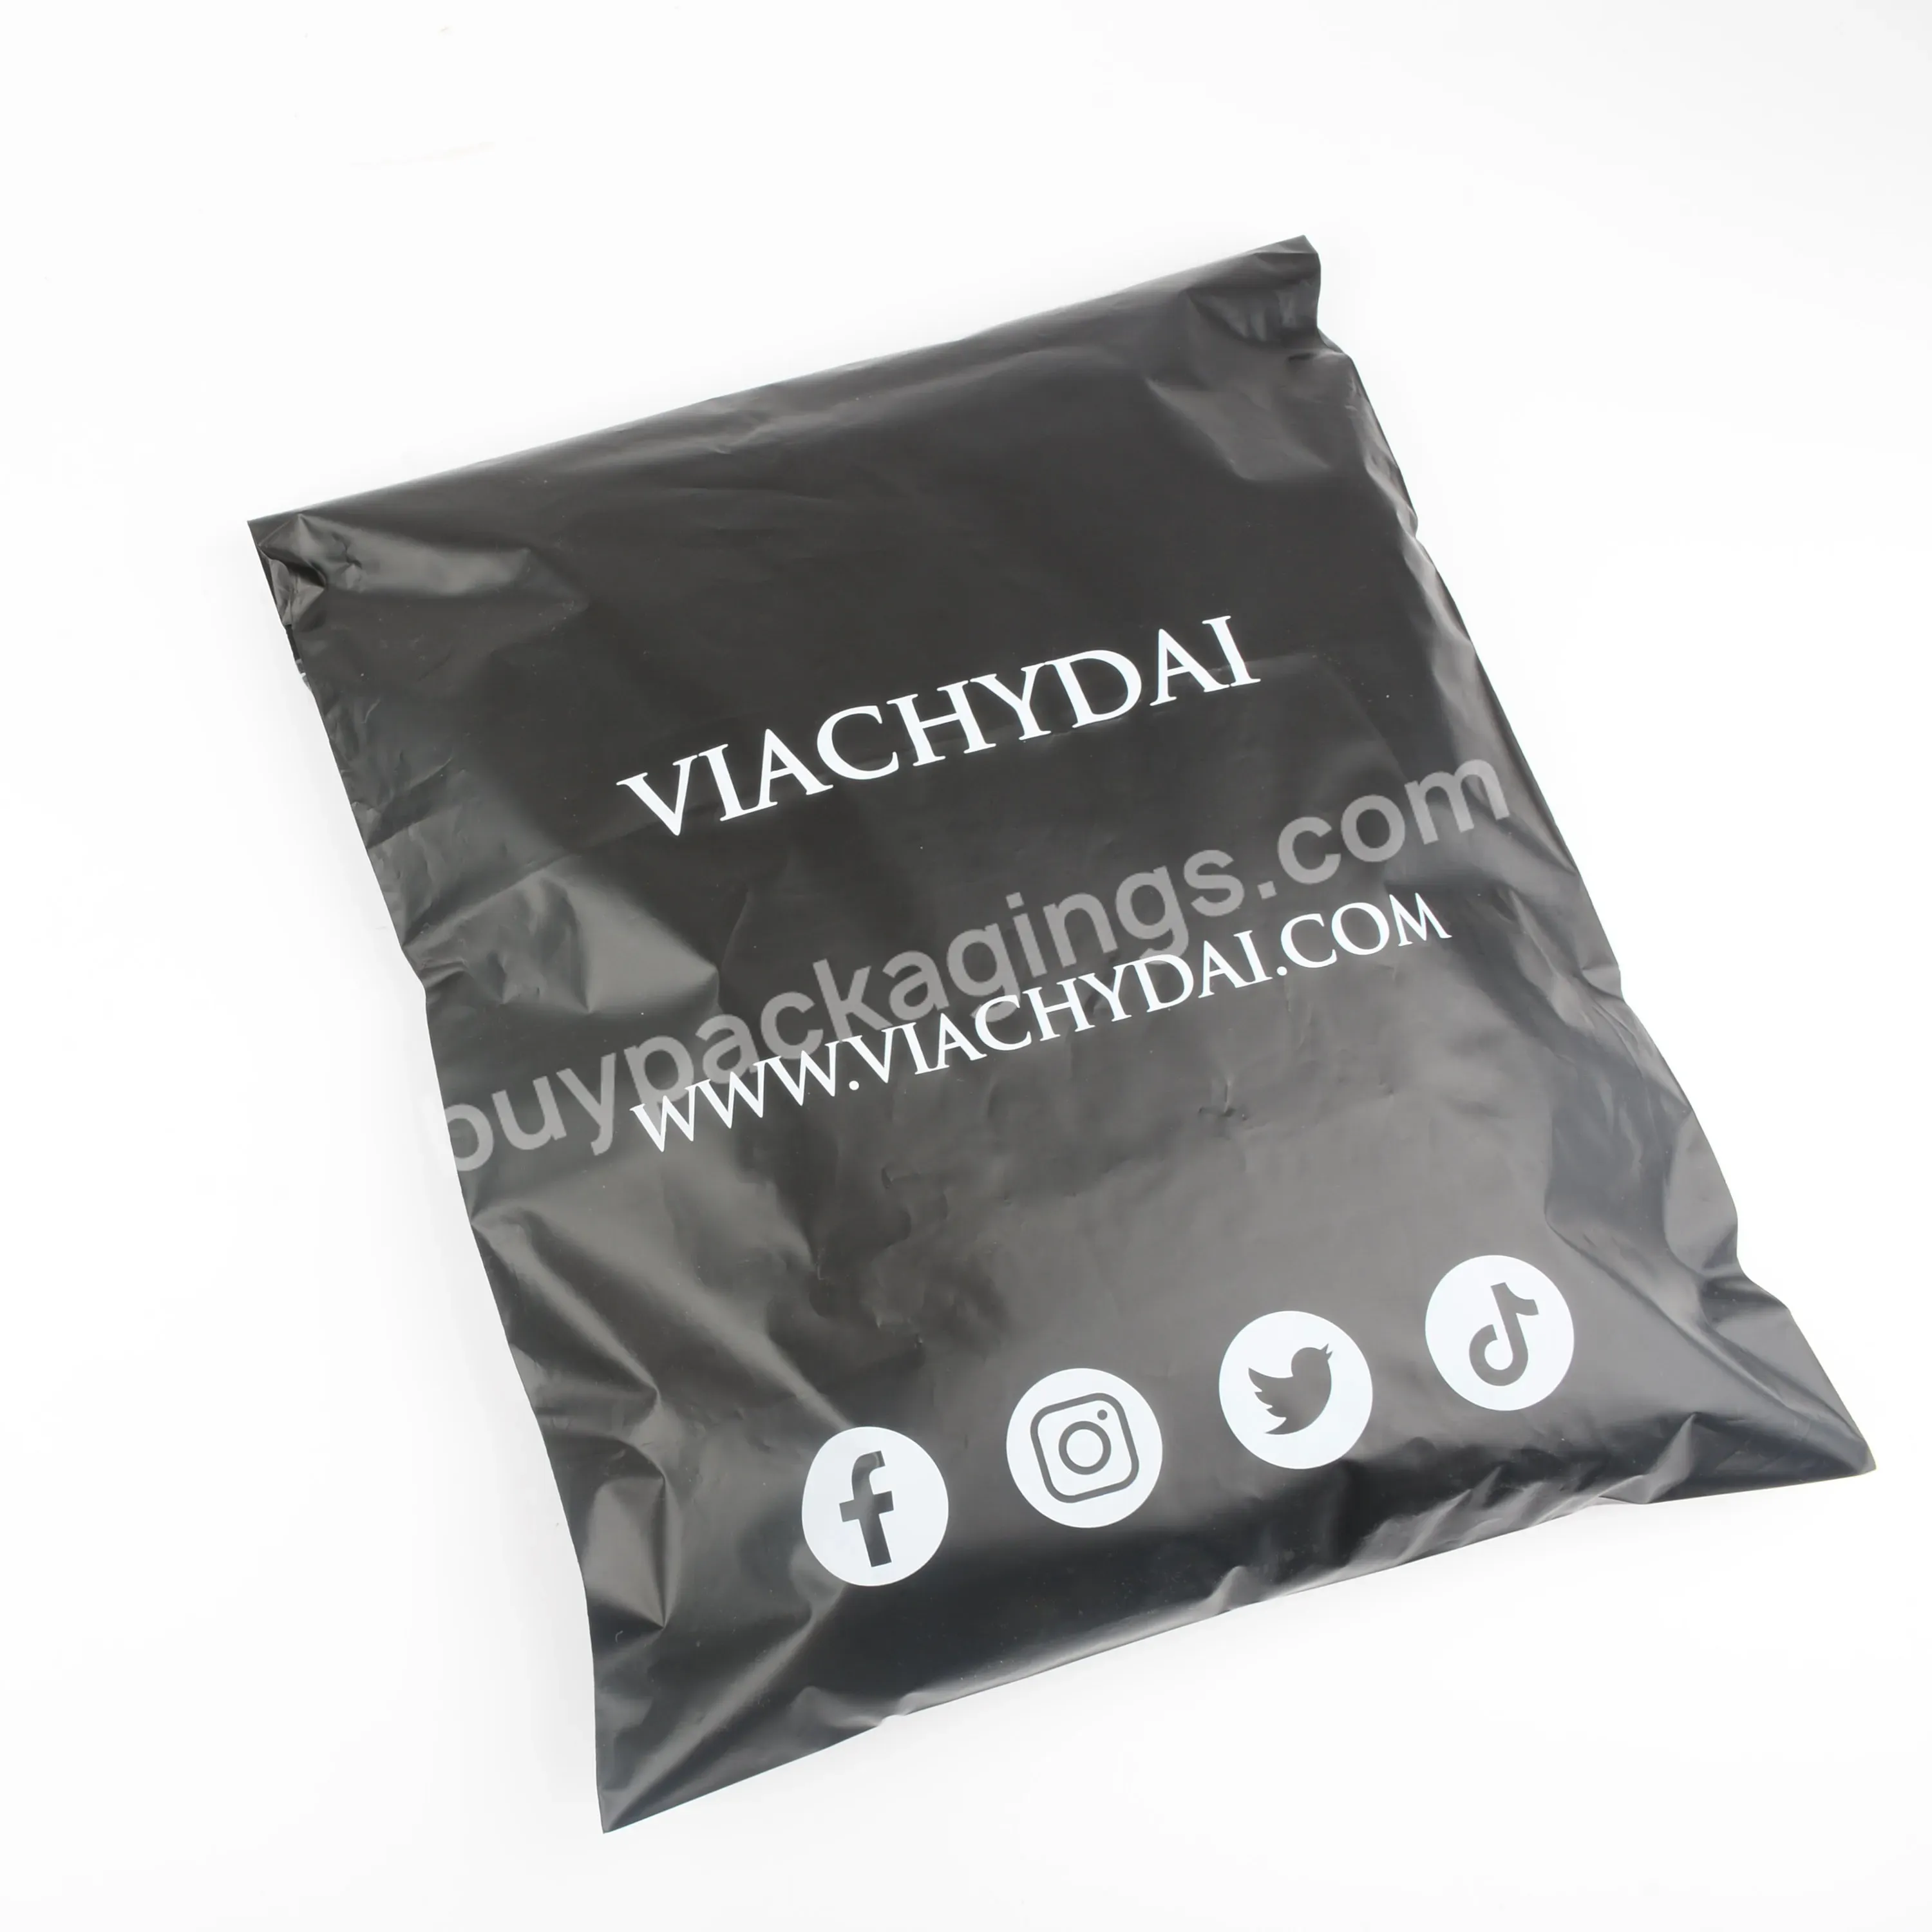 Newly Designed Mailing Bags Beige Mailing Plastic Bags For Product Packaging And Product Logistics - Buy Newly Designed Mailing Bags,Beige Mailing Plastic Bags For Product Packaging,Mailing Bags.